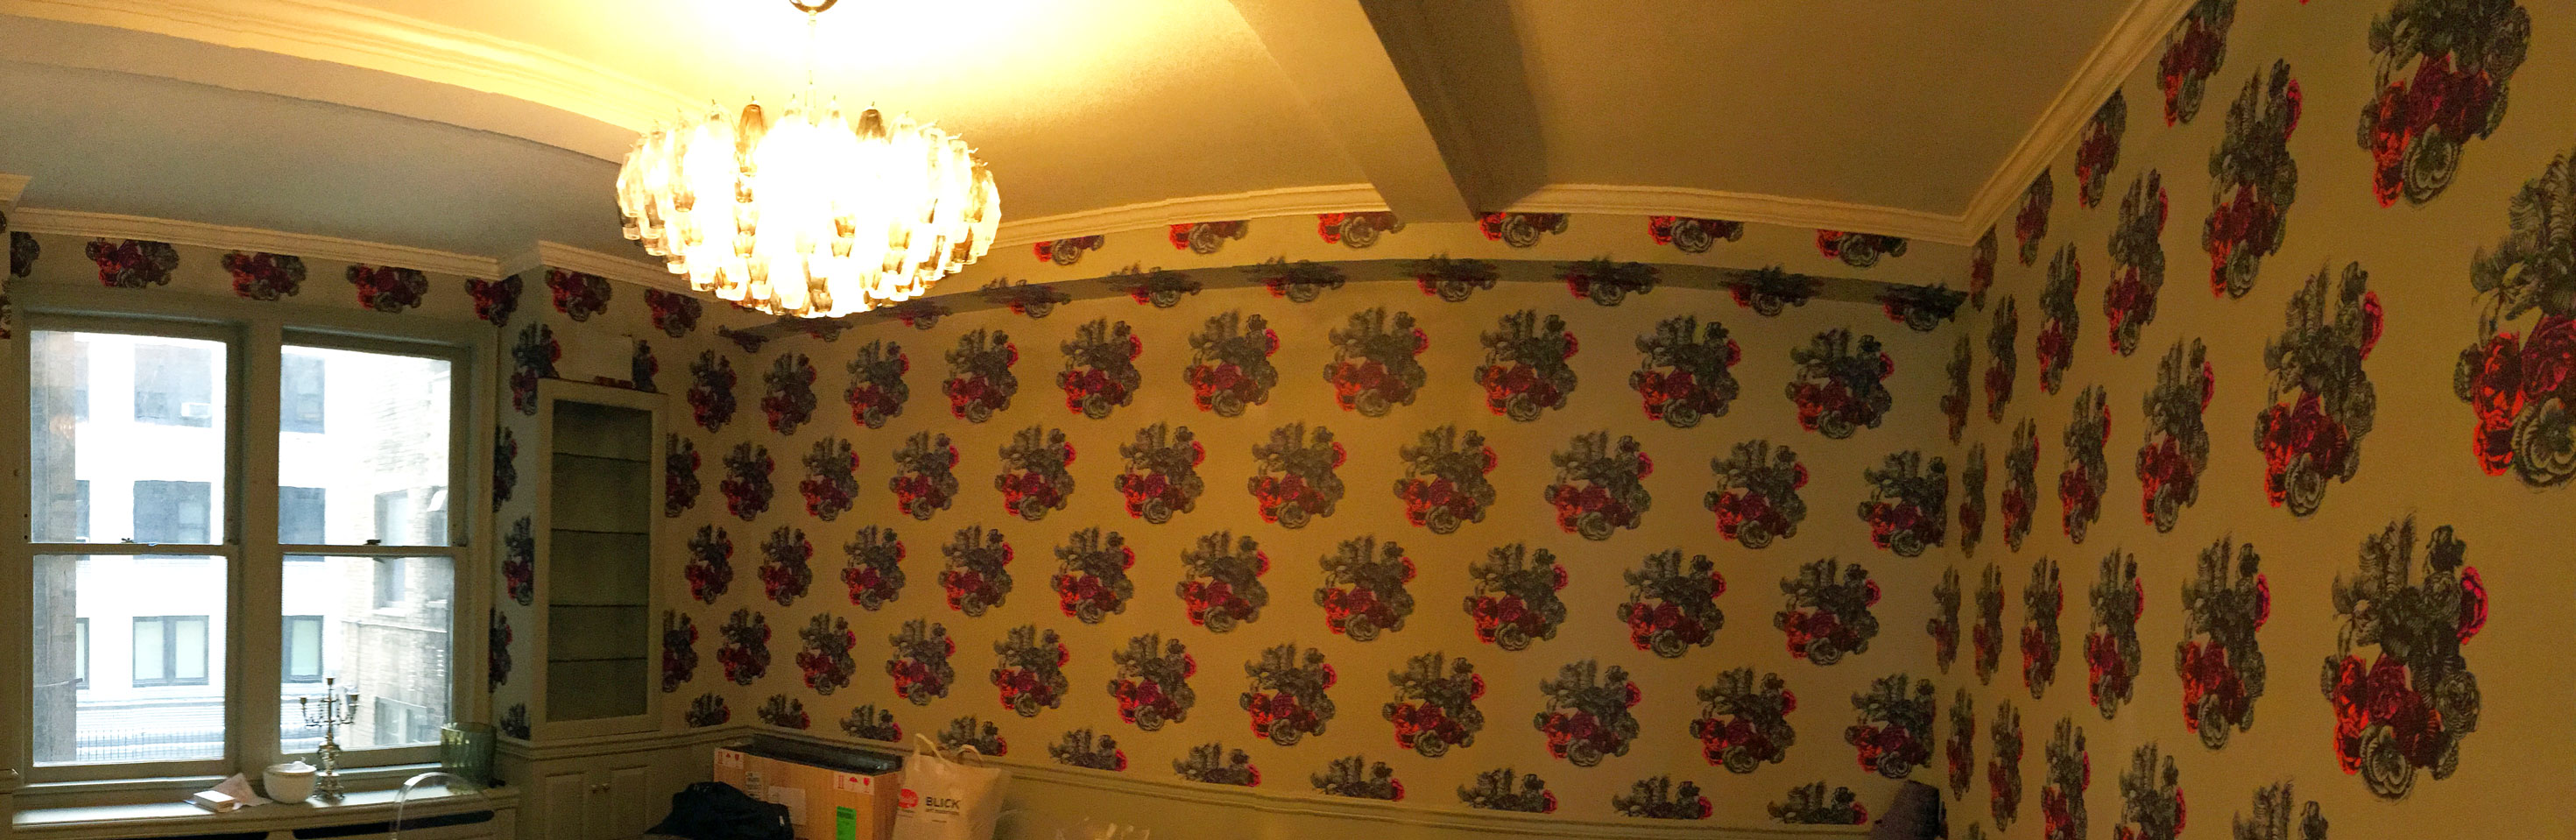 3d floral wallpaper with bright chandelier